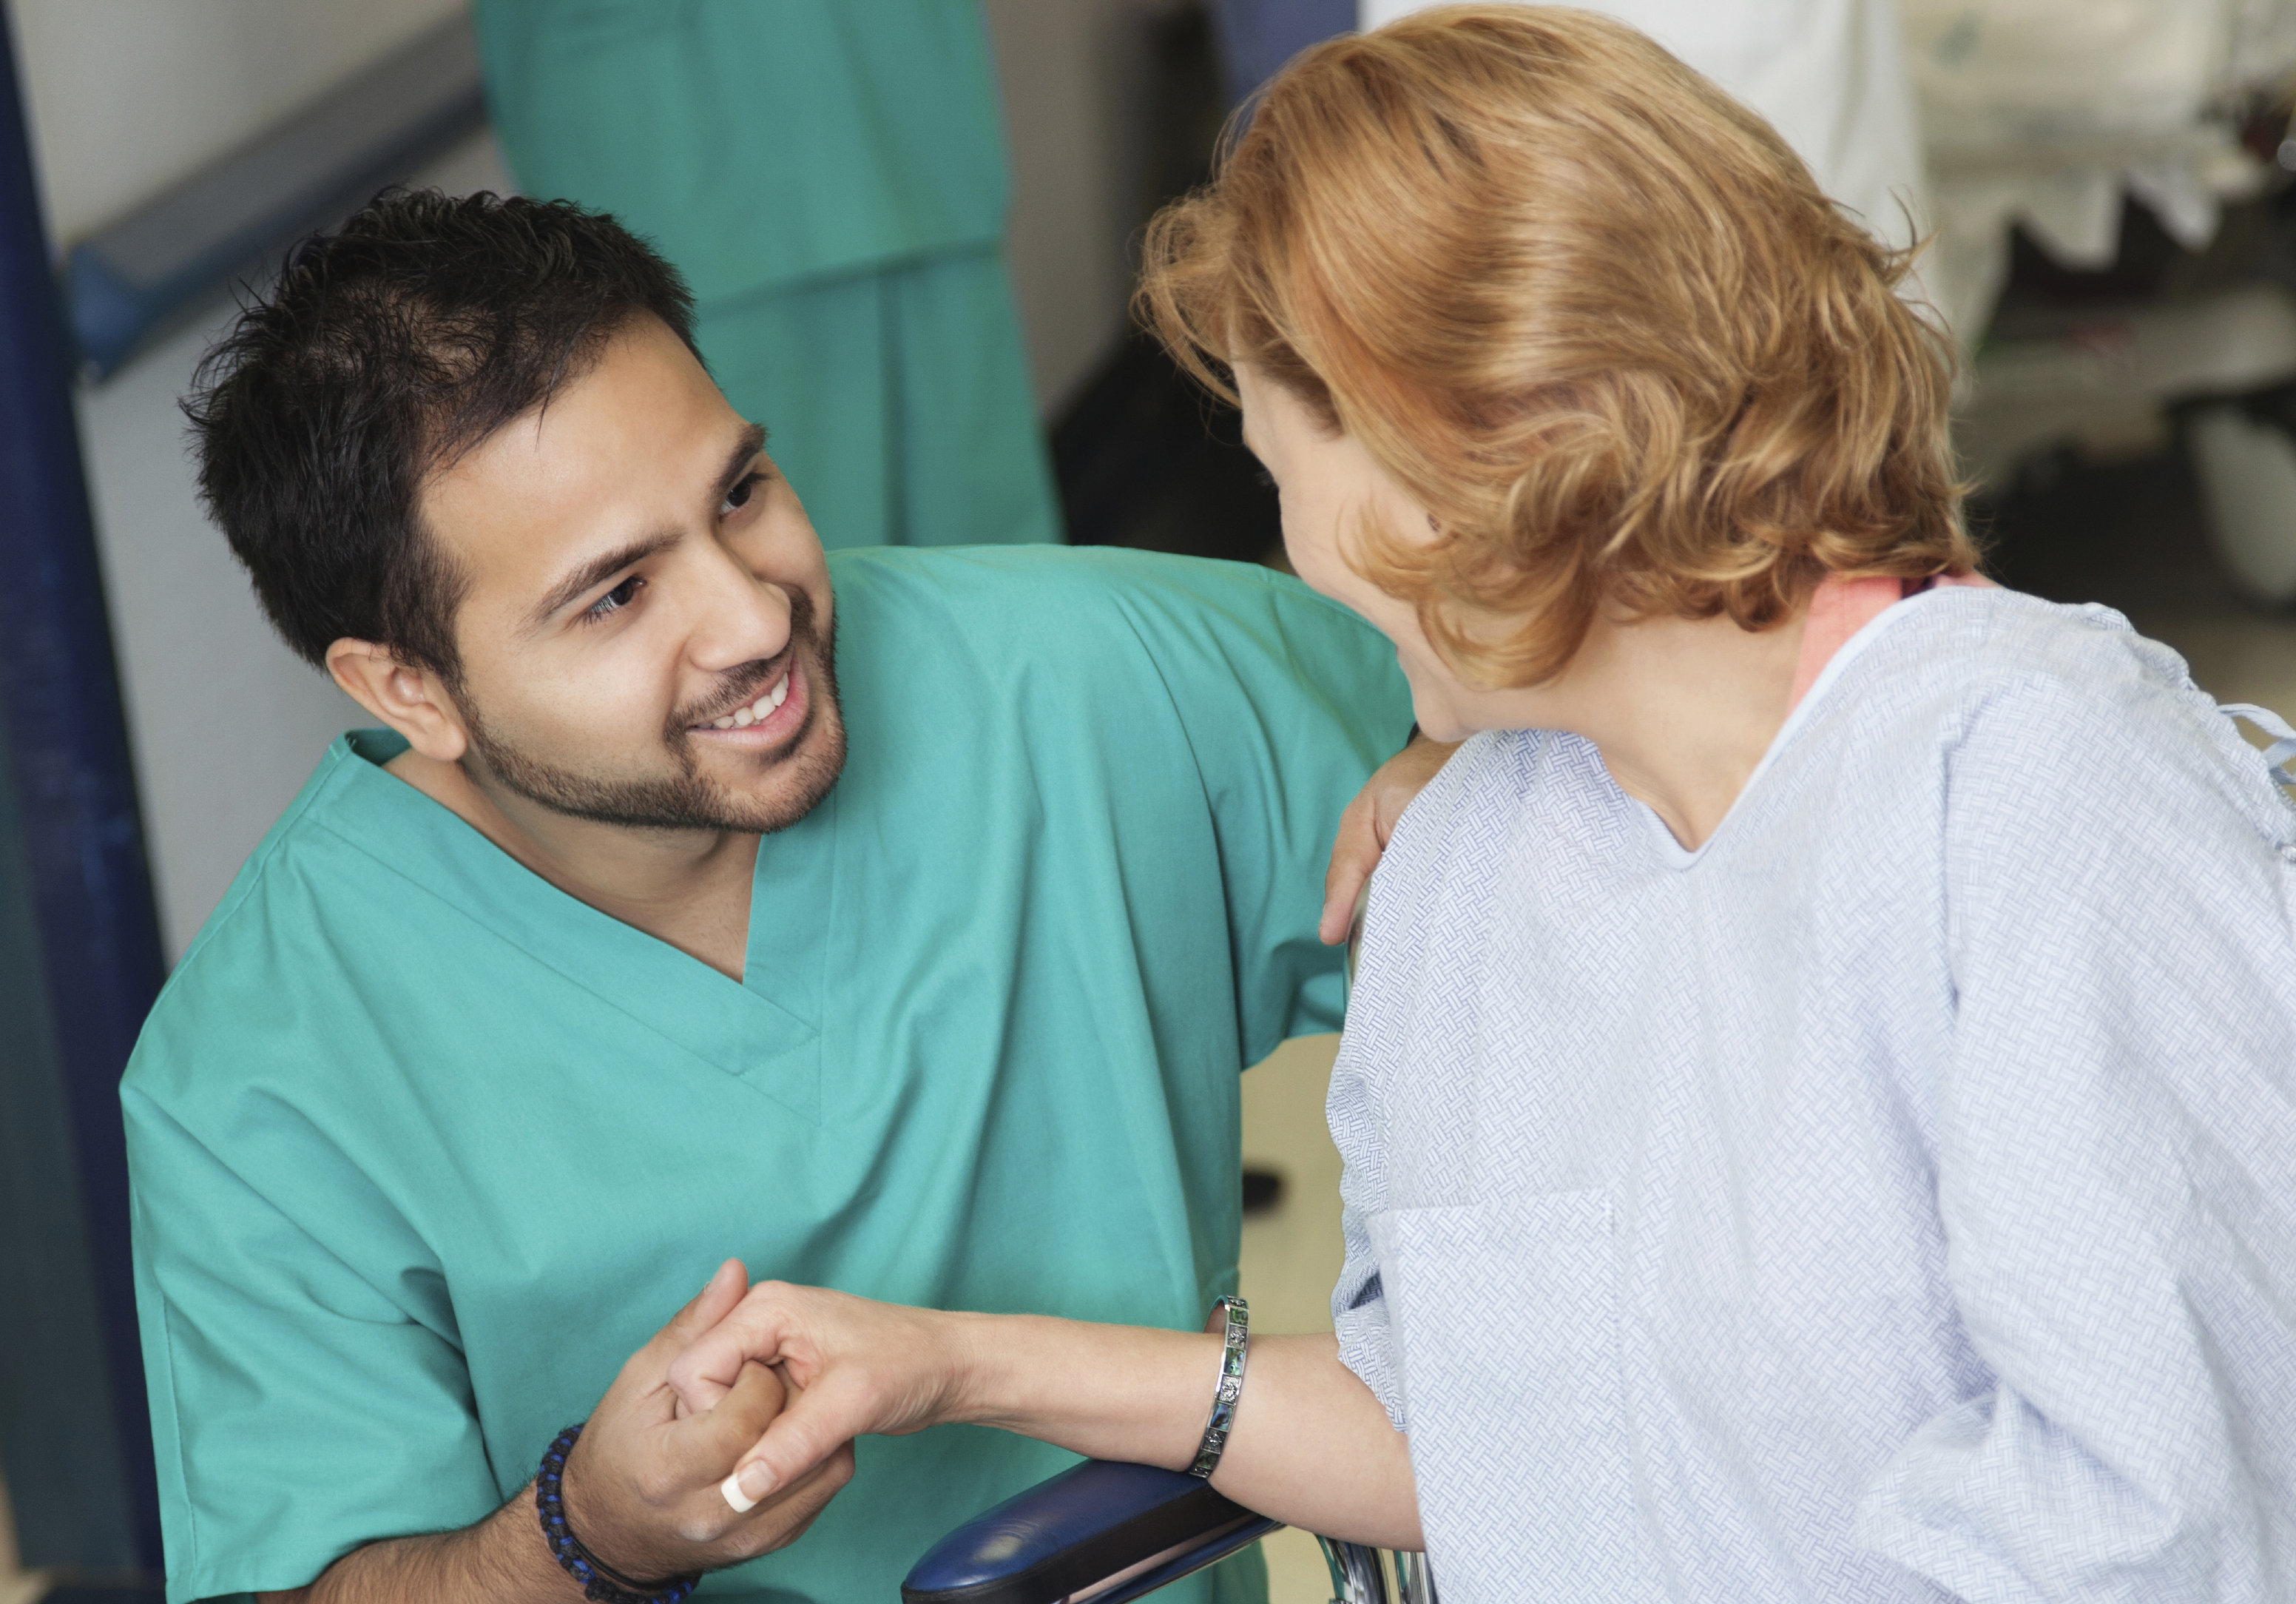 Can a nurse be friends with a former patient?